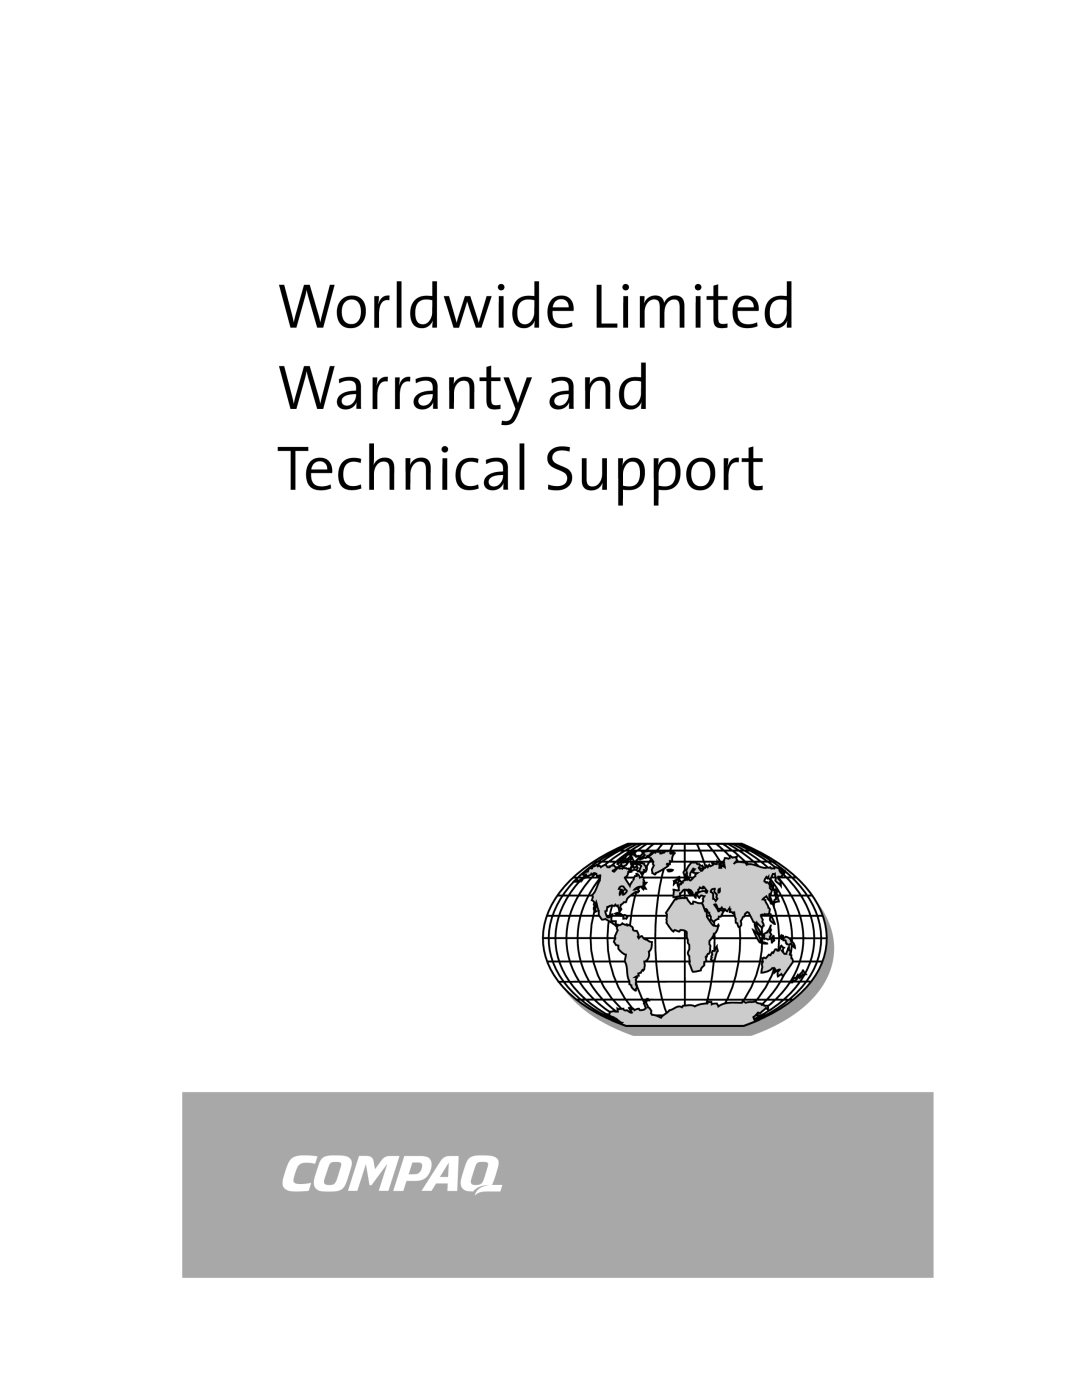 HP X1018CL, X1020US, X1012QV, X1010US, X1001US, X1002US, X1050US, R3001 manual Worldwide Limited Warranty and Technical Support 